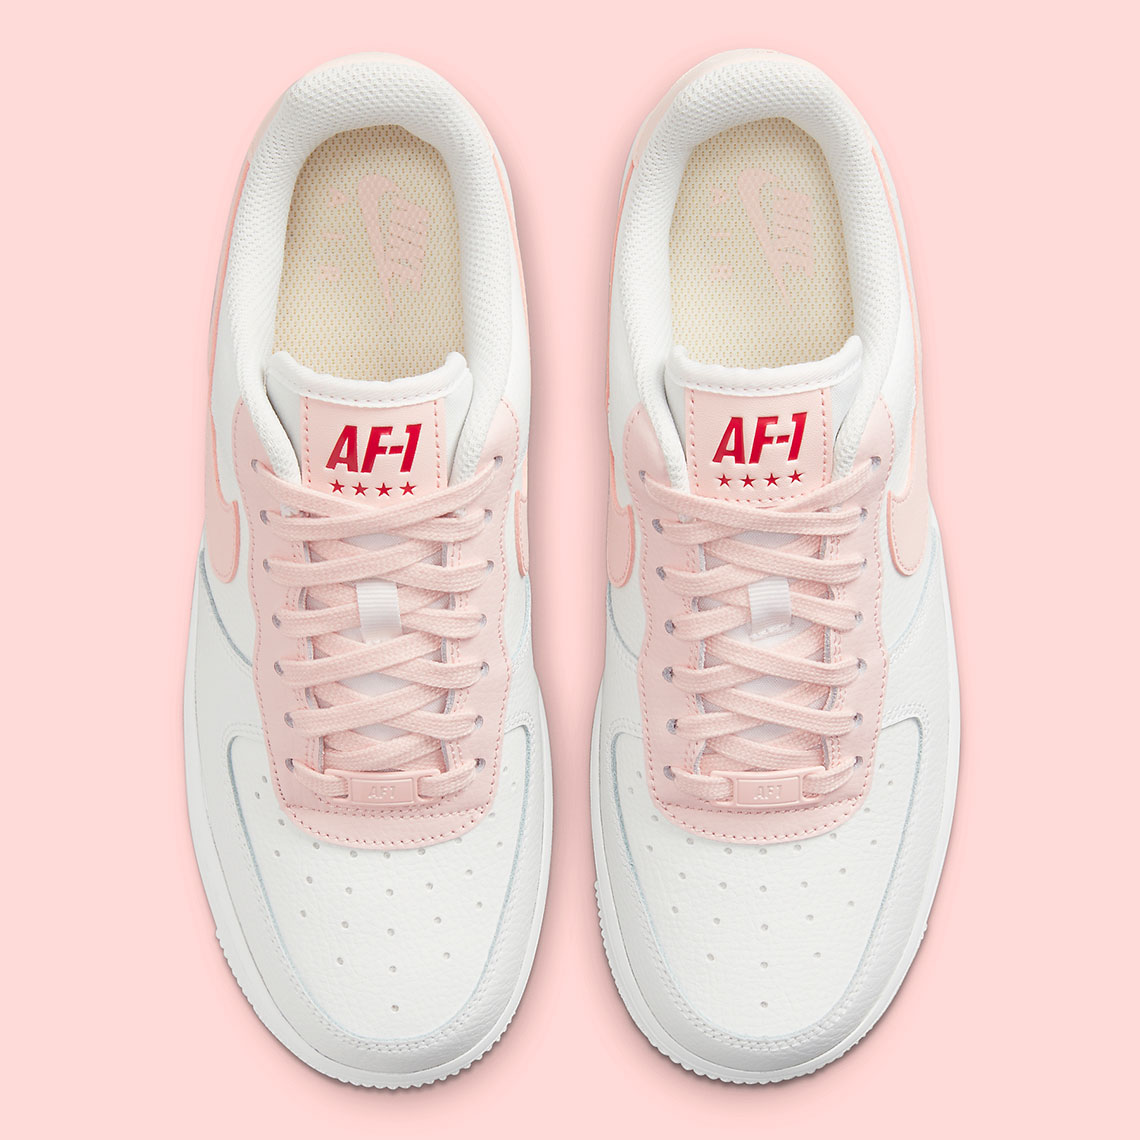 nike air force 1 wmns summit white pale coral summit white university red 315115 167 3